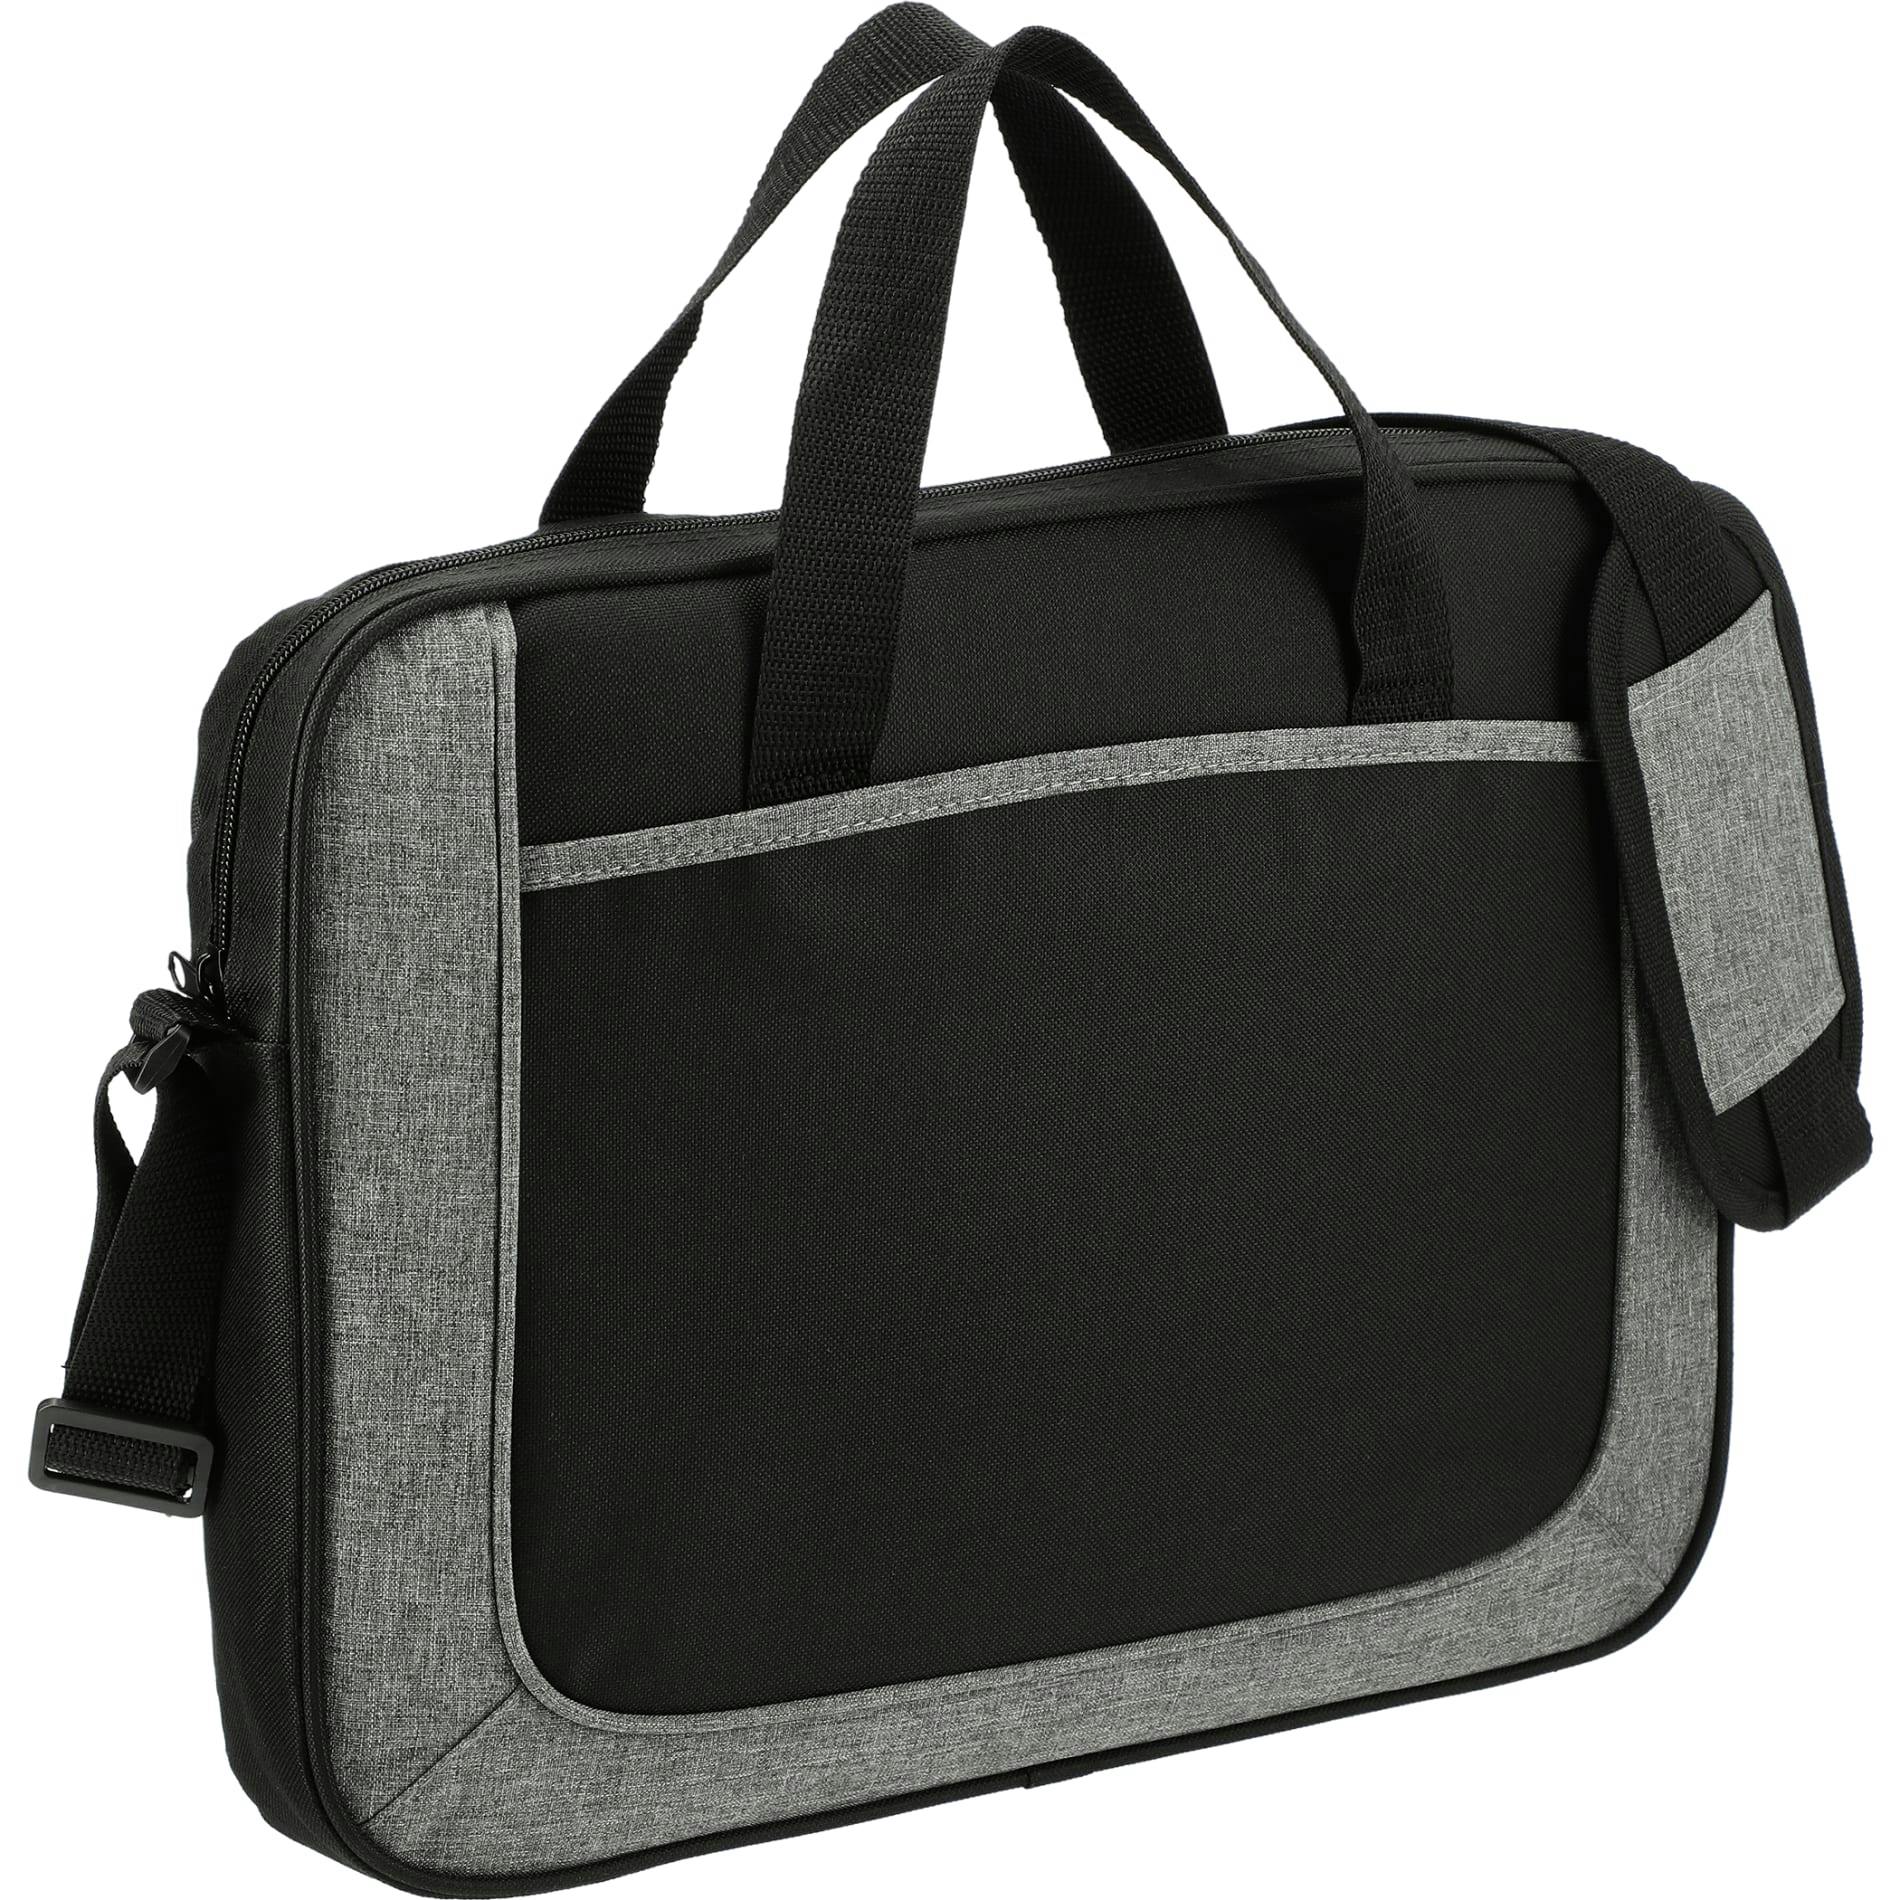 Dolphin Business Briefcase - additional Image 2